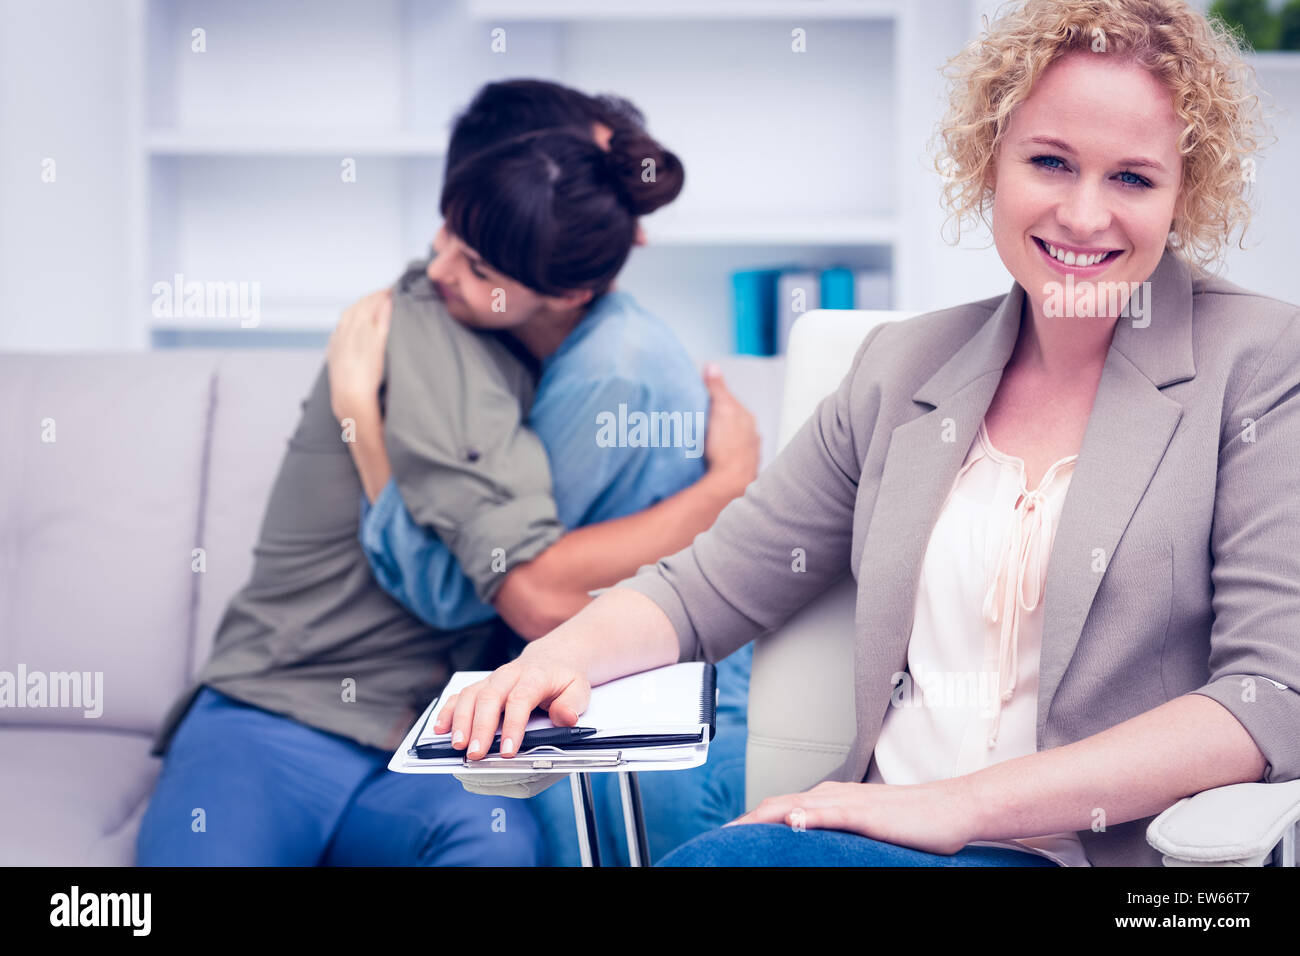 Smiling Therapist With Comforting Patients In The Background Stock